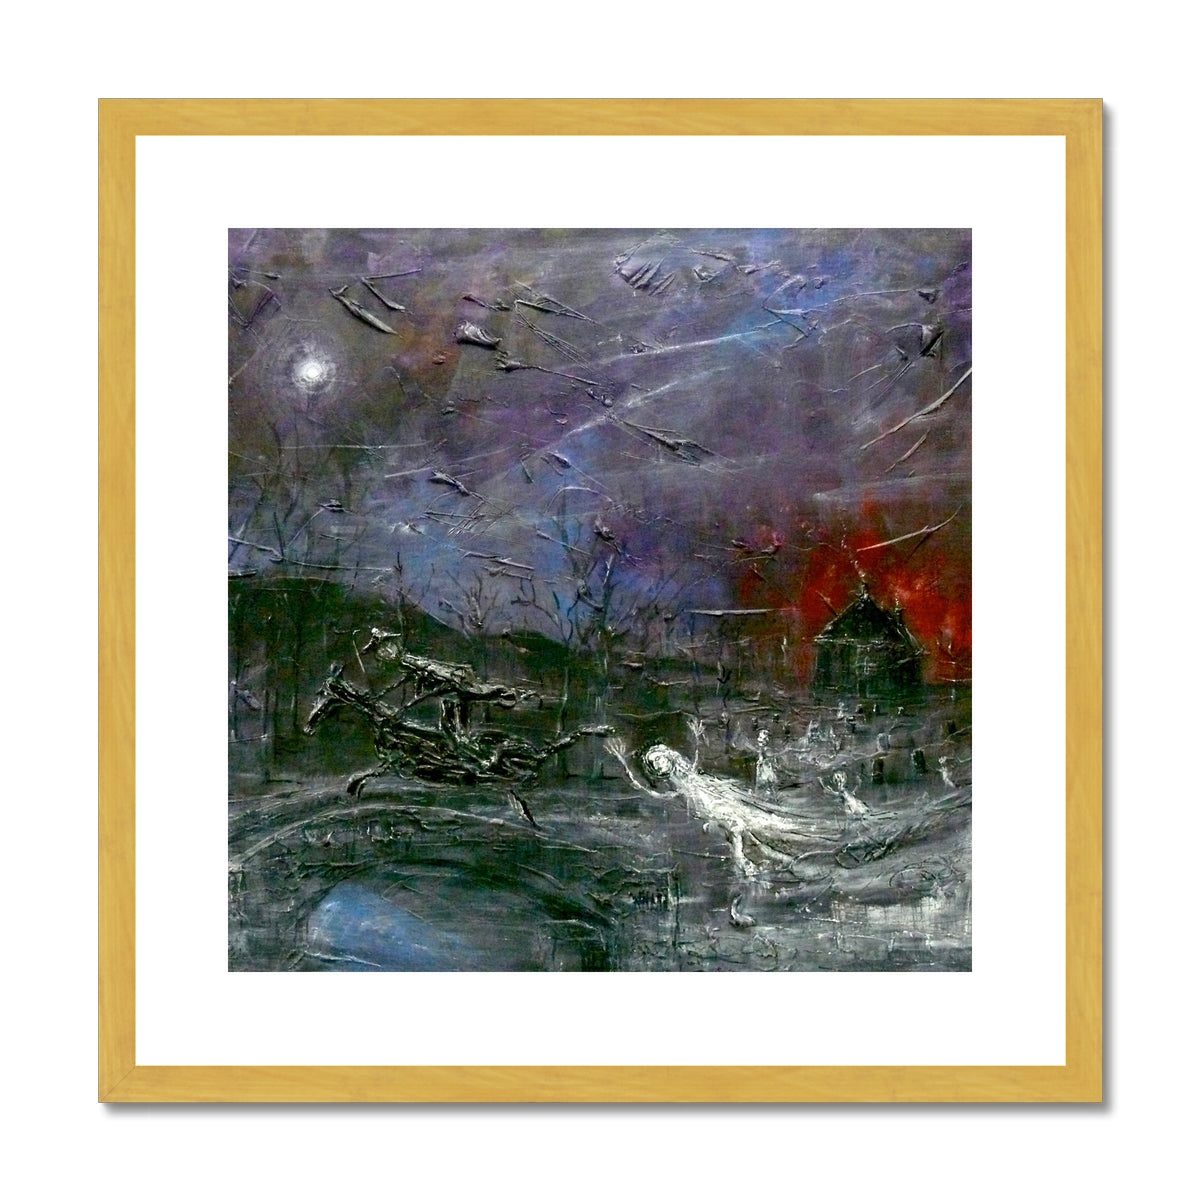 Tam O Shanter Painting | Antique Framed & Mounted Prints From Scotland-Antique Framed & Mounted Prints-Abstract & Impressionistic Art Gallery-20"x20"-Gold Frame-Paintings, Prints, Homeware, Art Gifts From Scotland By Scottish Artist Kevin Hunter